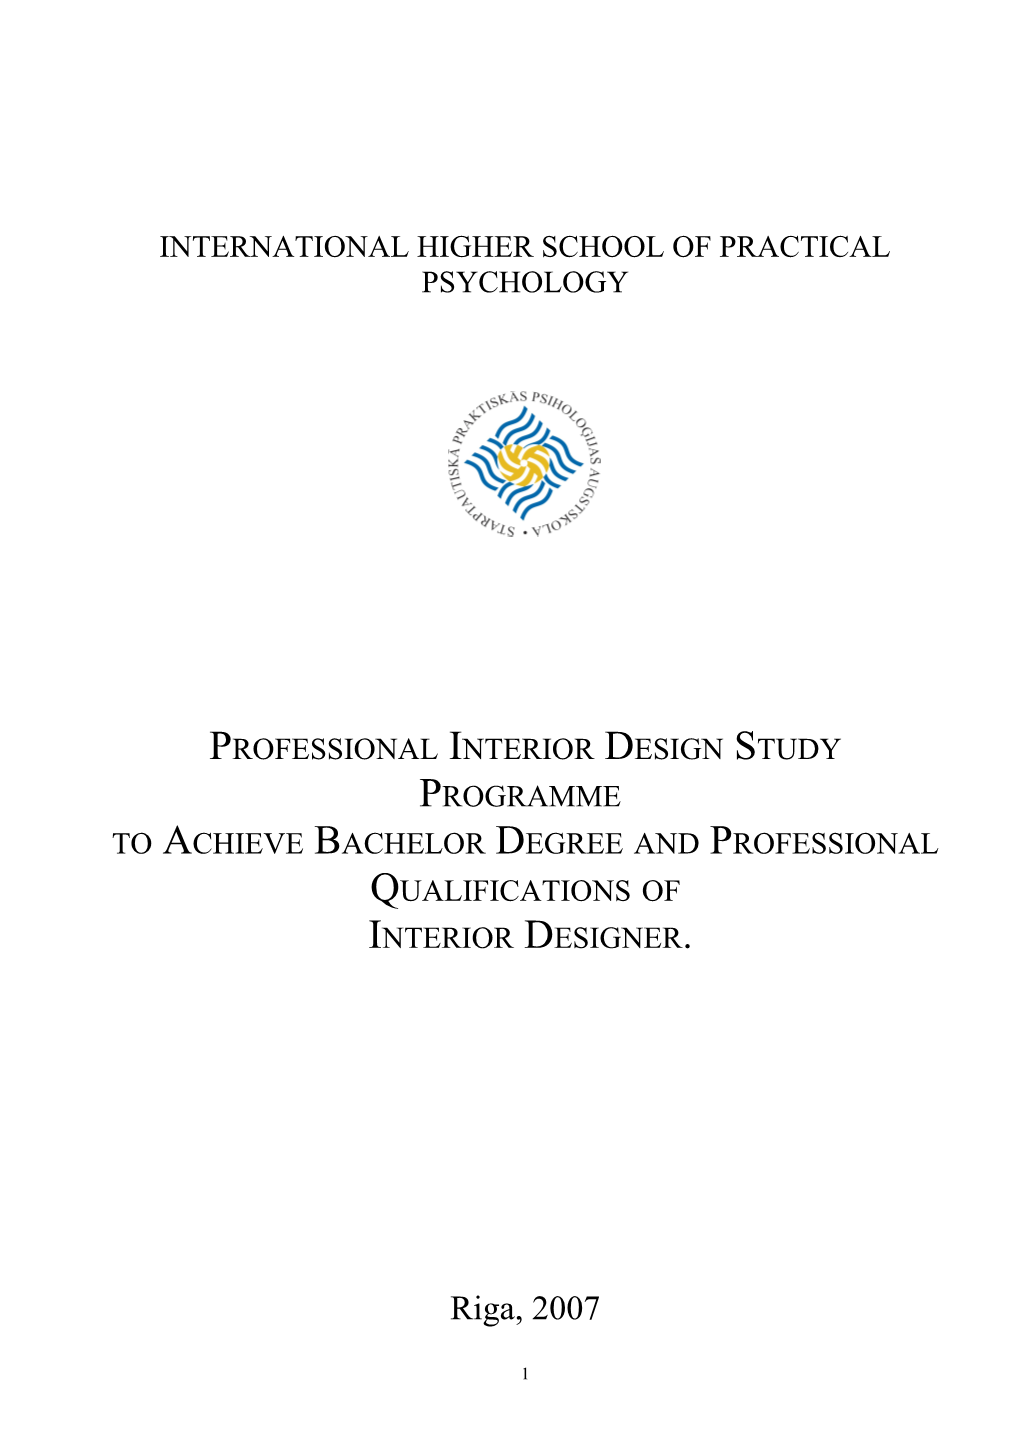 Professional Interior Design Study Programme to Achieve Bachelor Degree and Professional